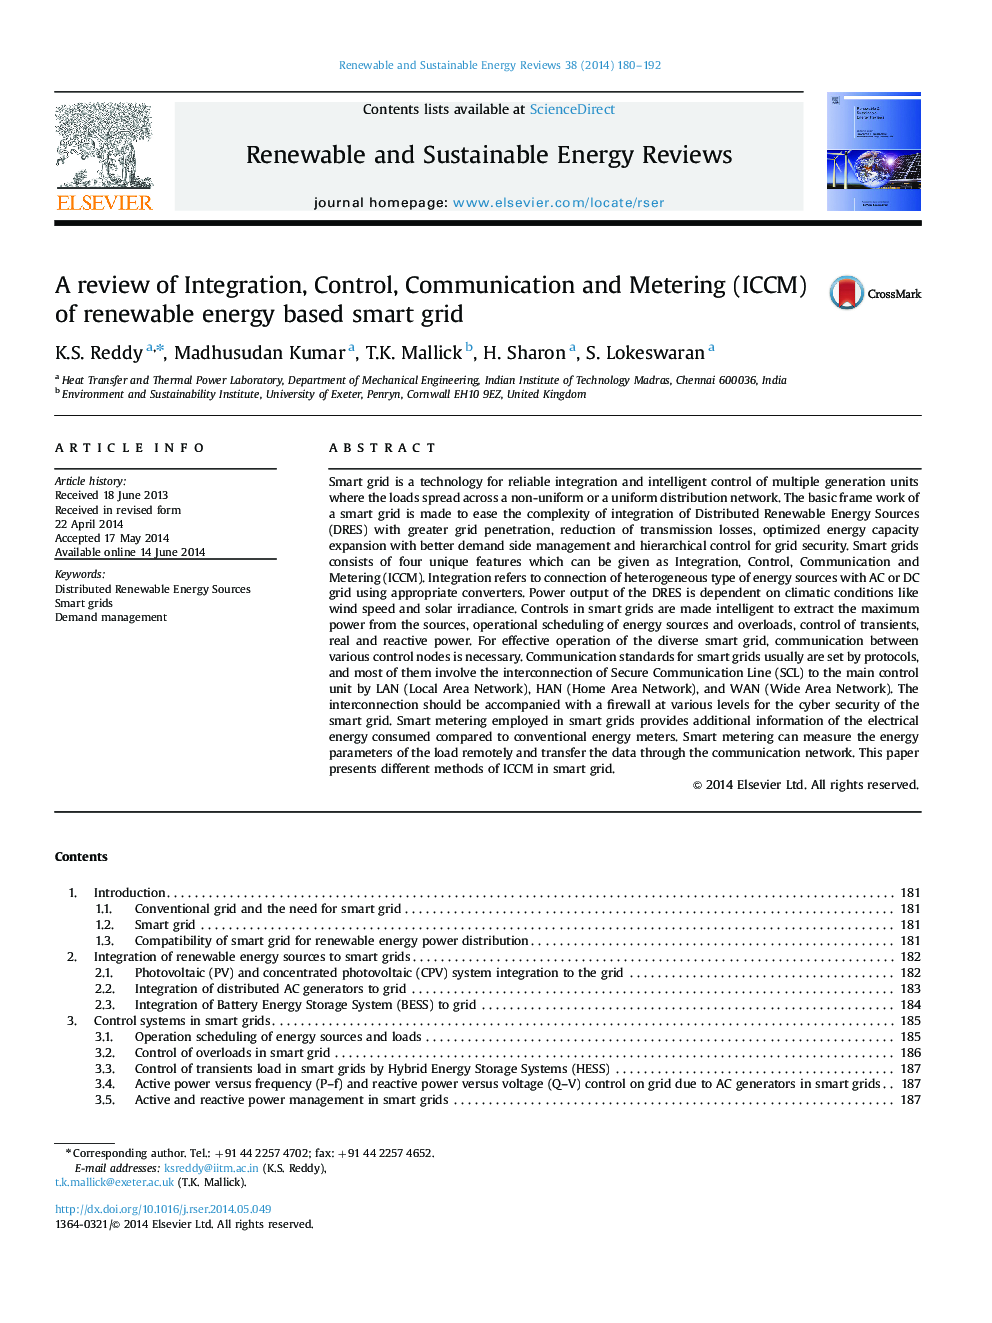 A review of Integration, Control, Communication and Metering (ICCM) of renewable energy based smart grid